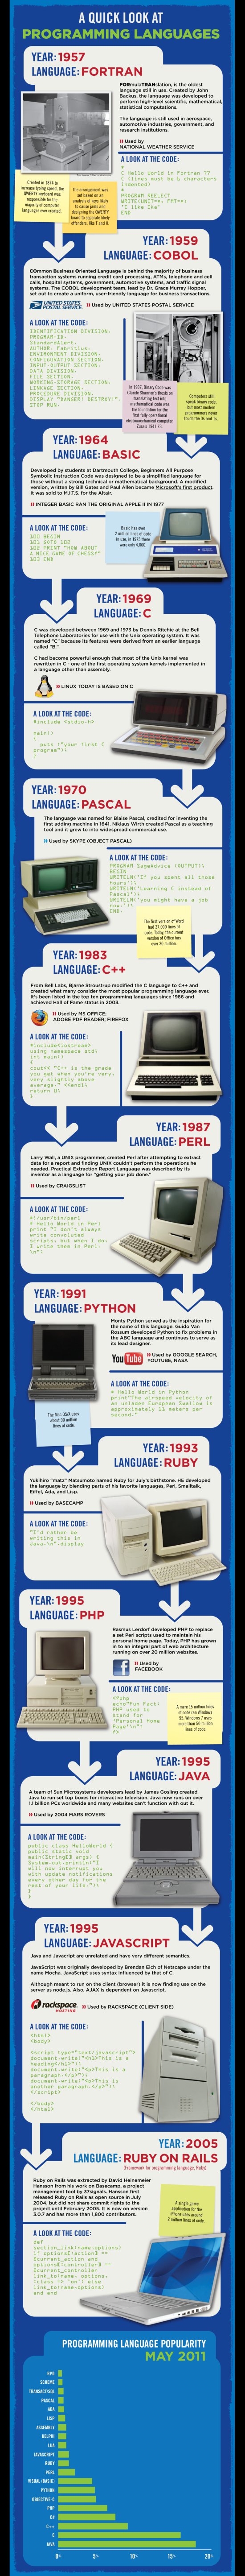 short history of the development of computer programming languages and softwares